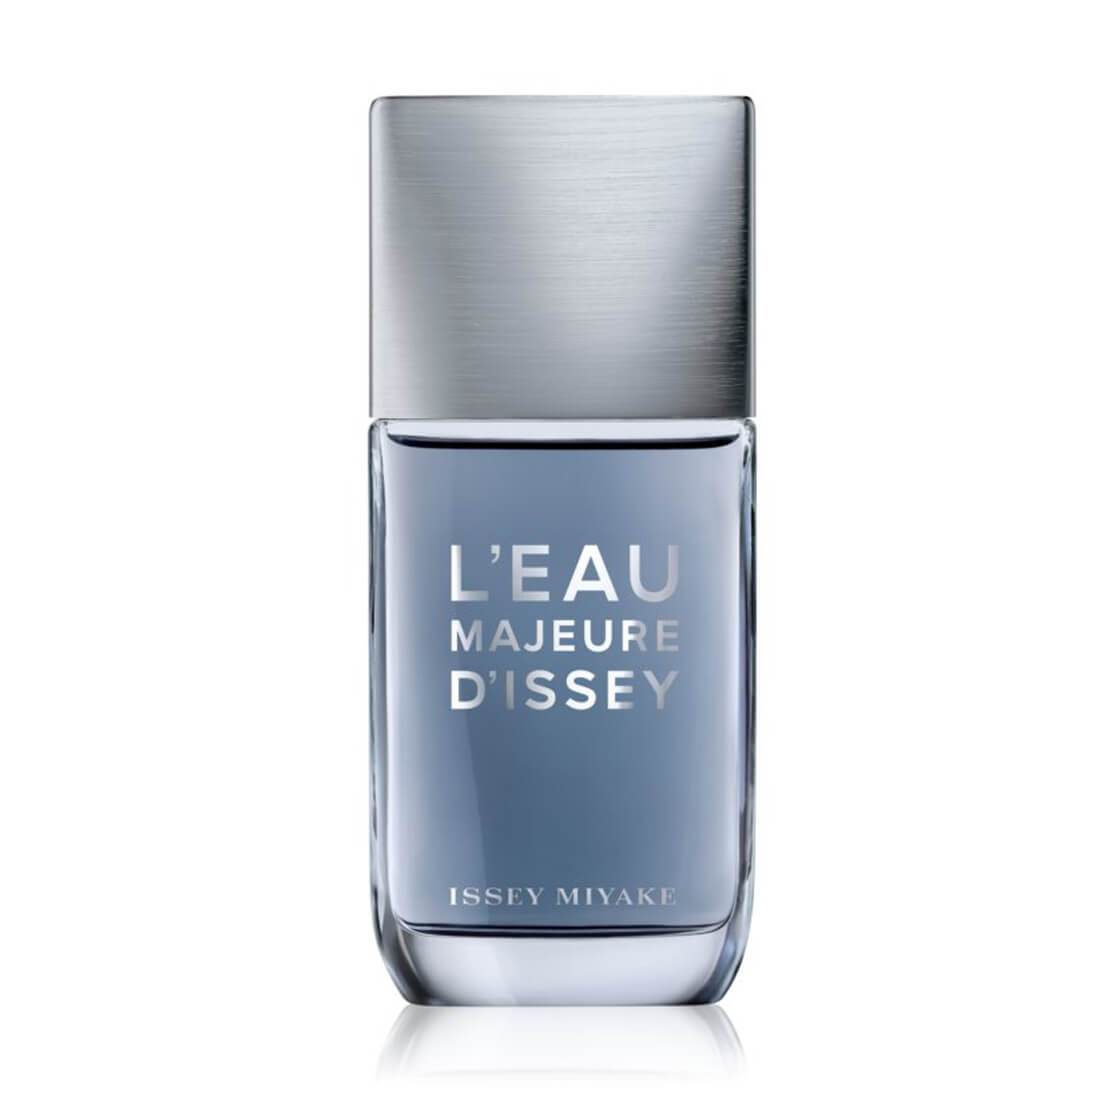 Issey Miyake L'eau Majeure D'issey EDT Perfume For Men - 100ml